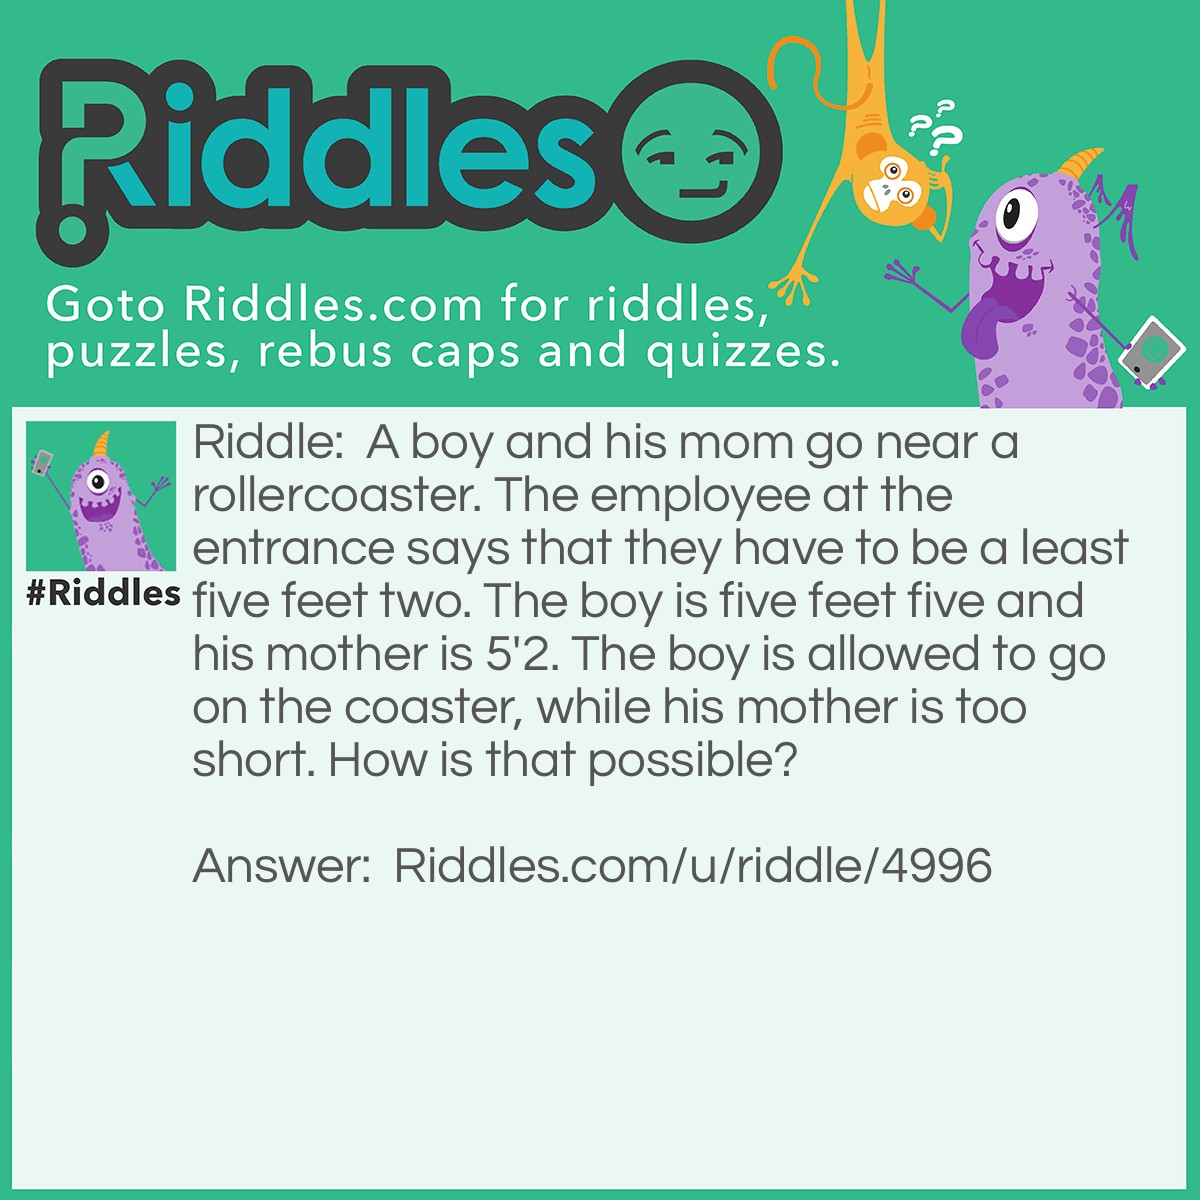 Riddle: A boy and his mom go near a rollercoaster. The employee at the entrance says that they have to be a least five feet two. The boy is five feet five and his mother is 5'2. The boy is allowed to go on the coaster, while his mother is too short. How is that possible? Answer: The mother is five centimeters. I never said " feet" when i describe the mother's height.